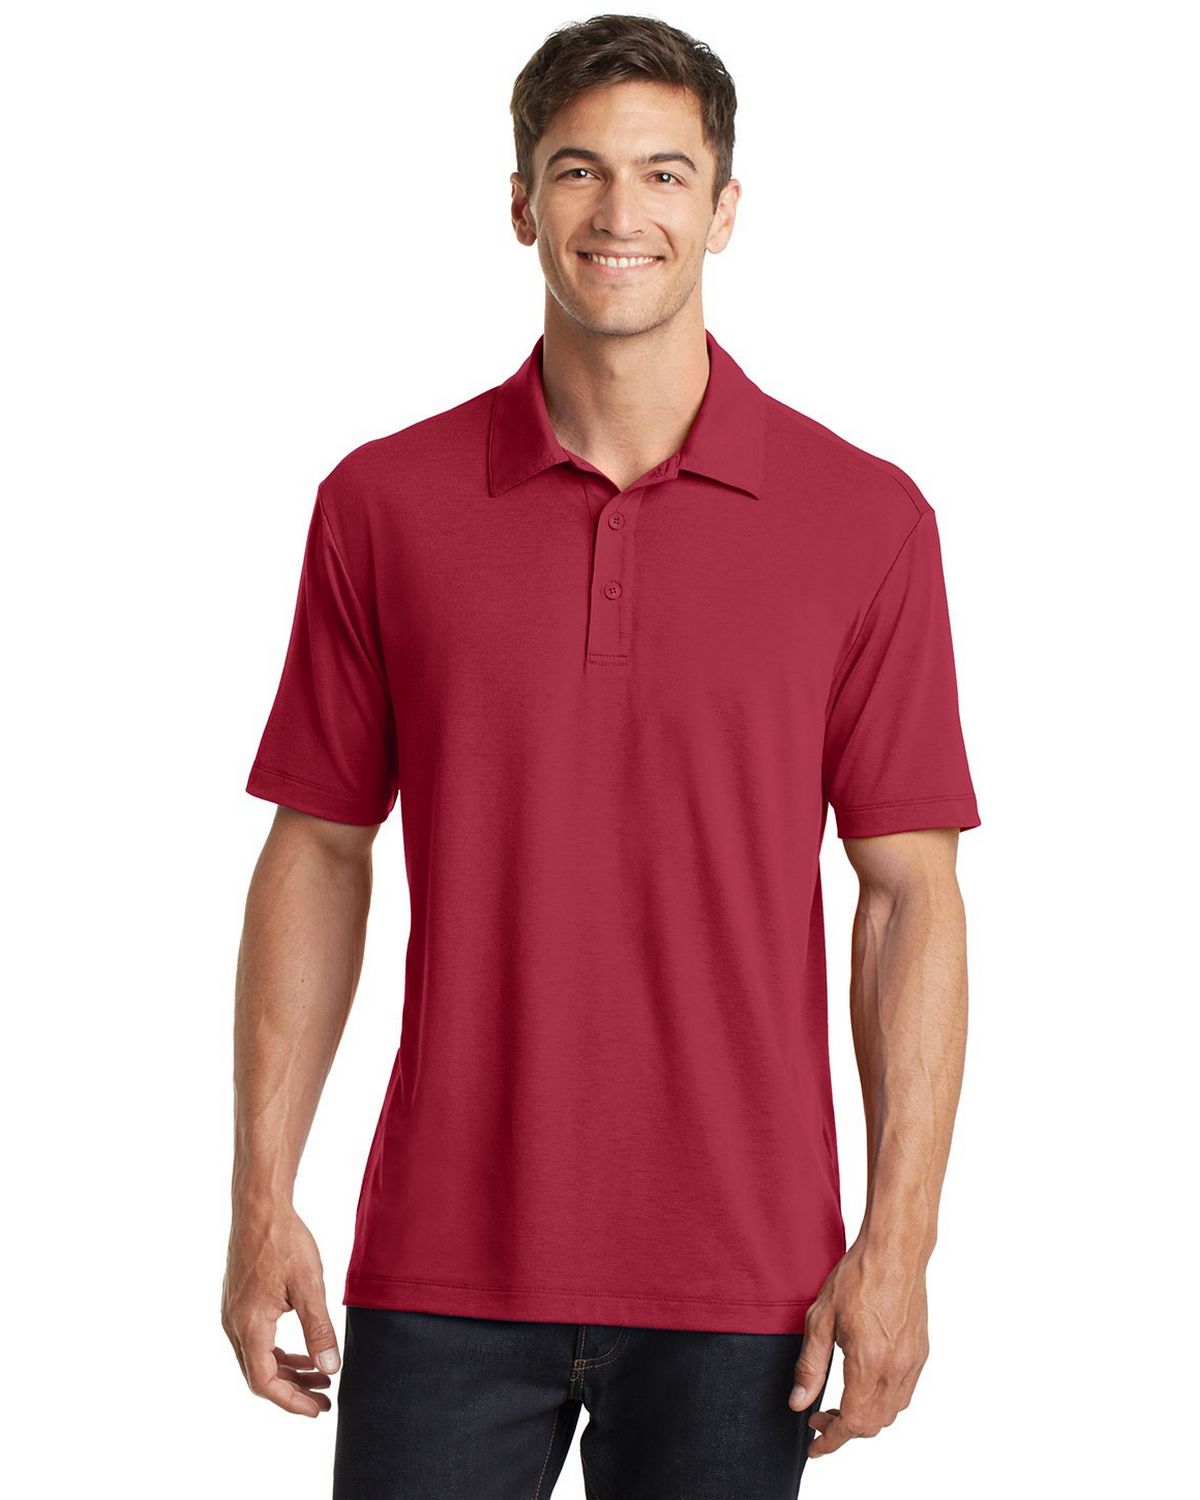 Port Authority K568 Cotton Touch Performance Polo Shirt for Business ...